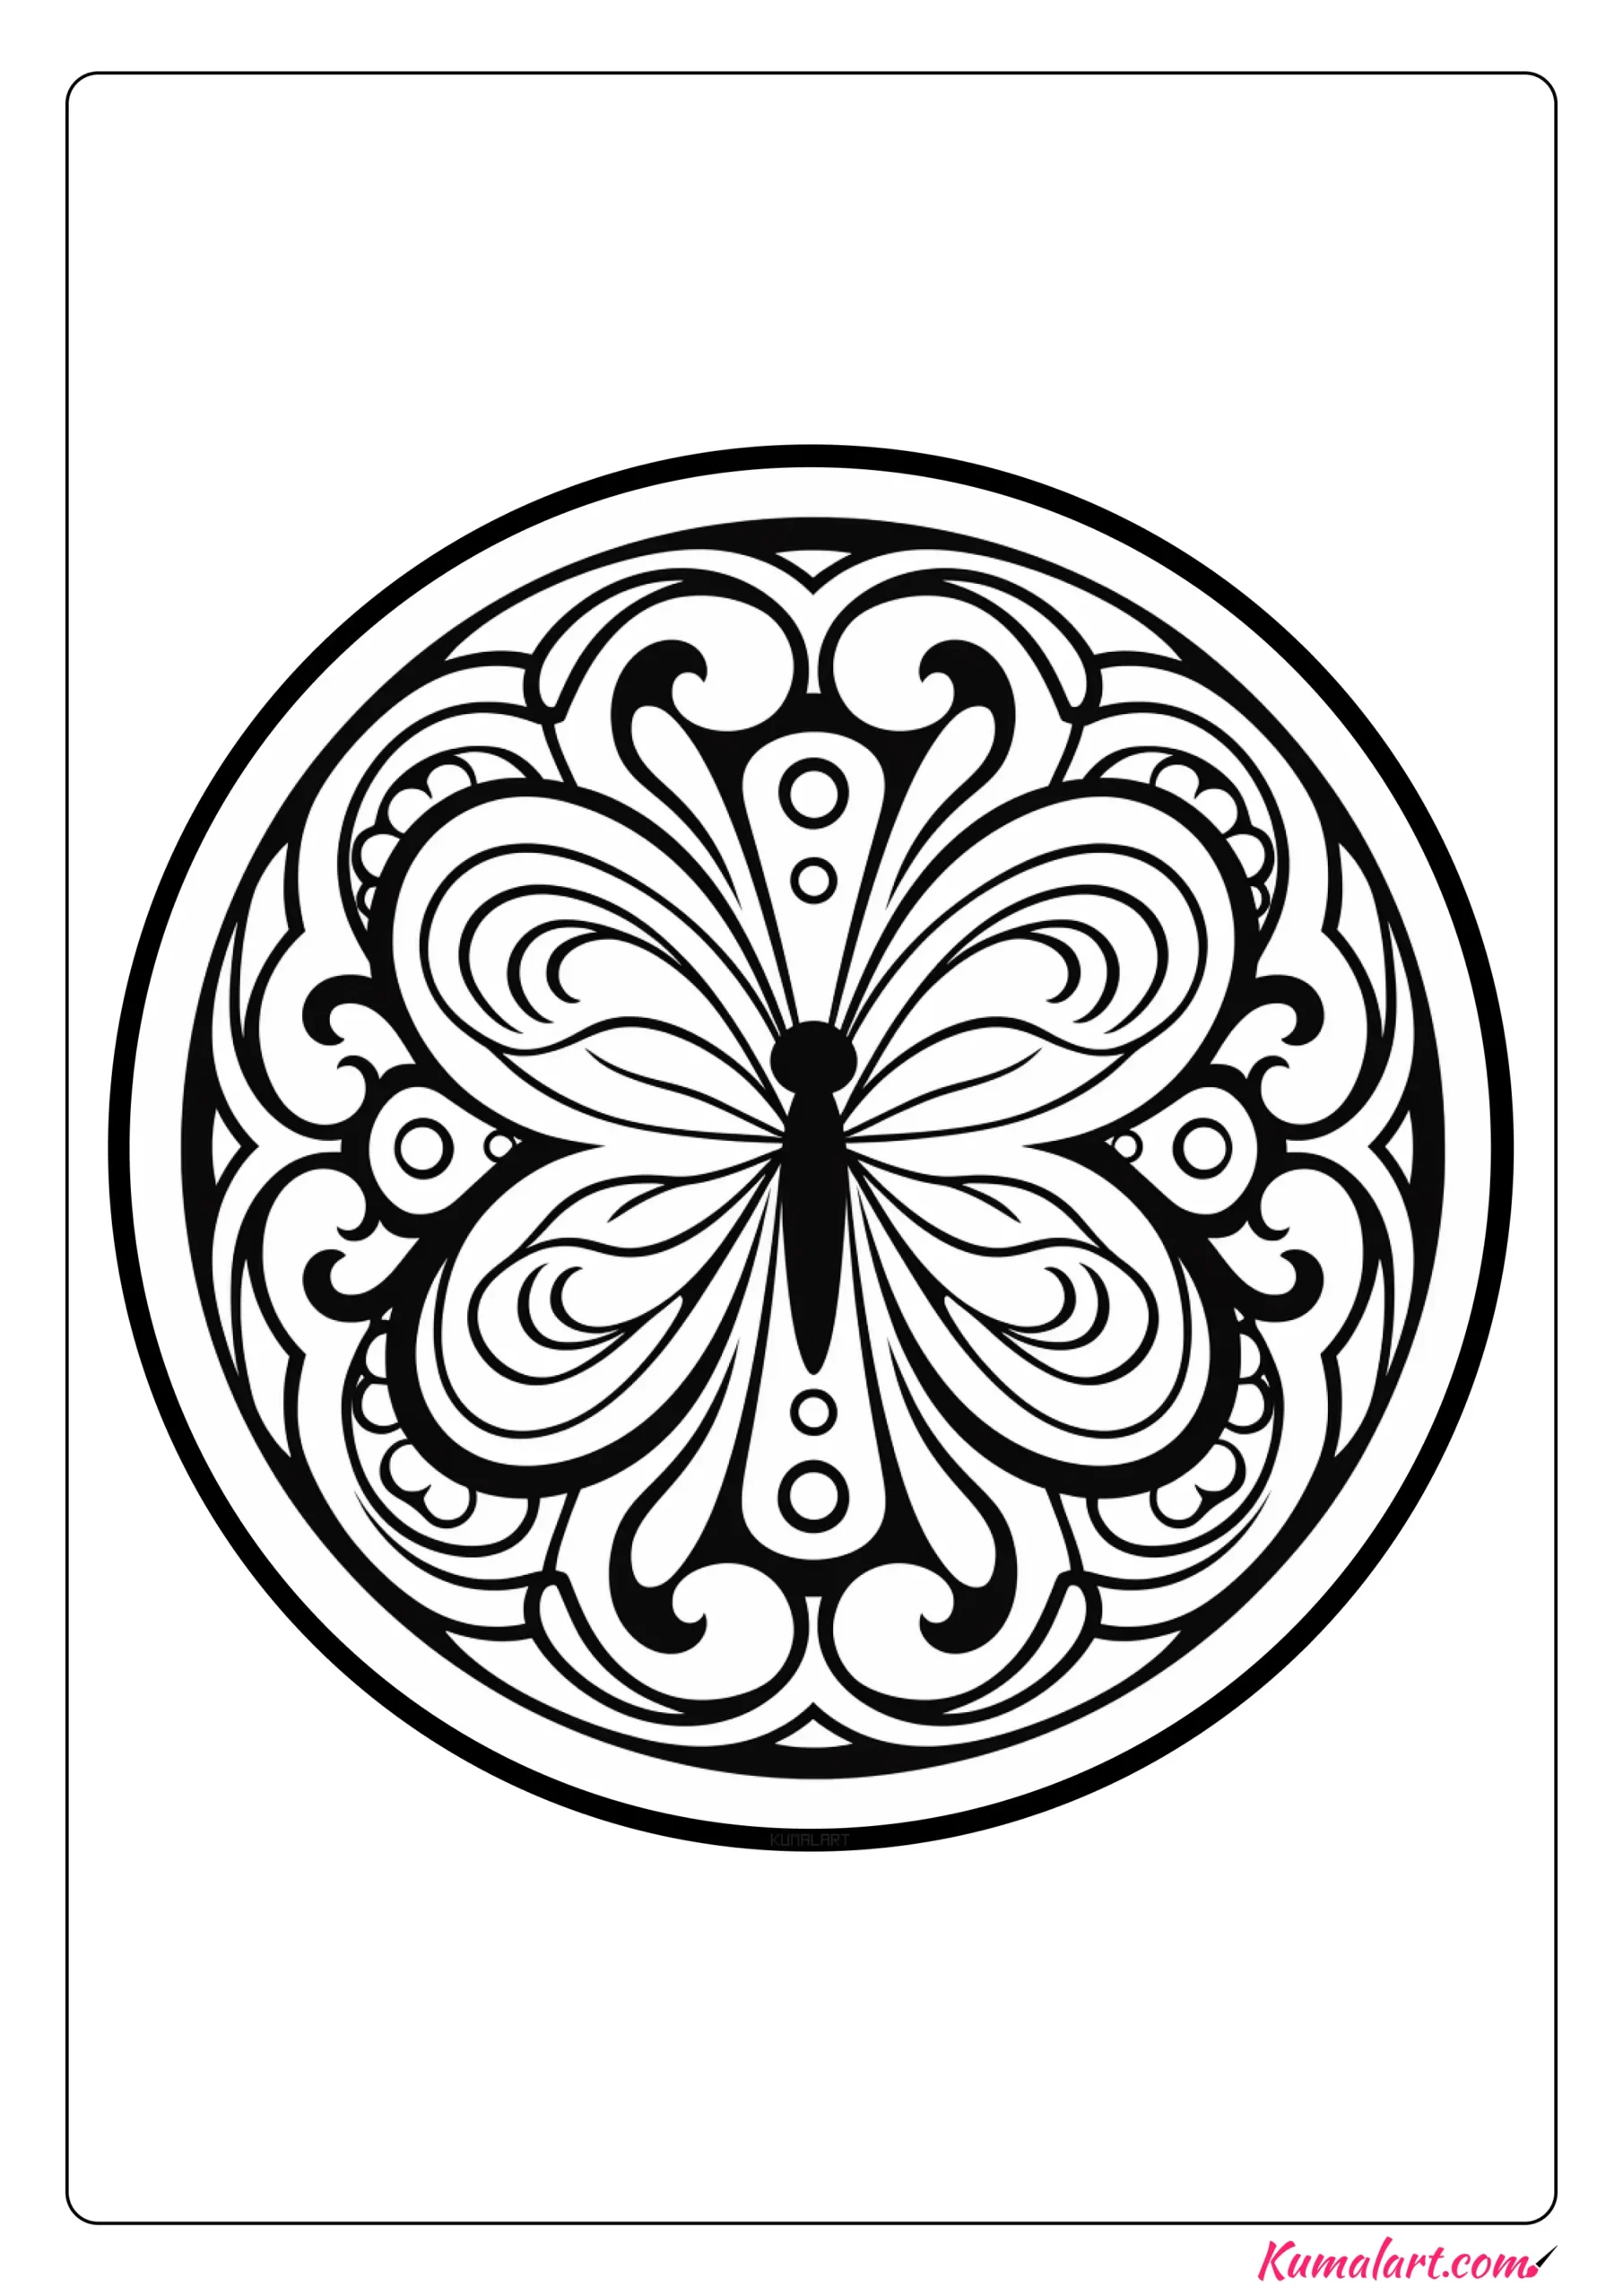 Max the Butterfly Mandala Coloring Page